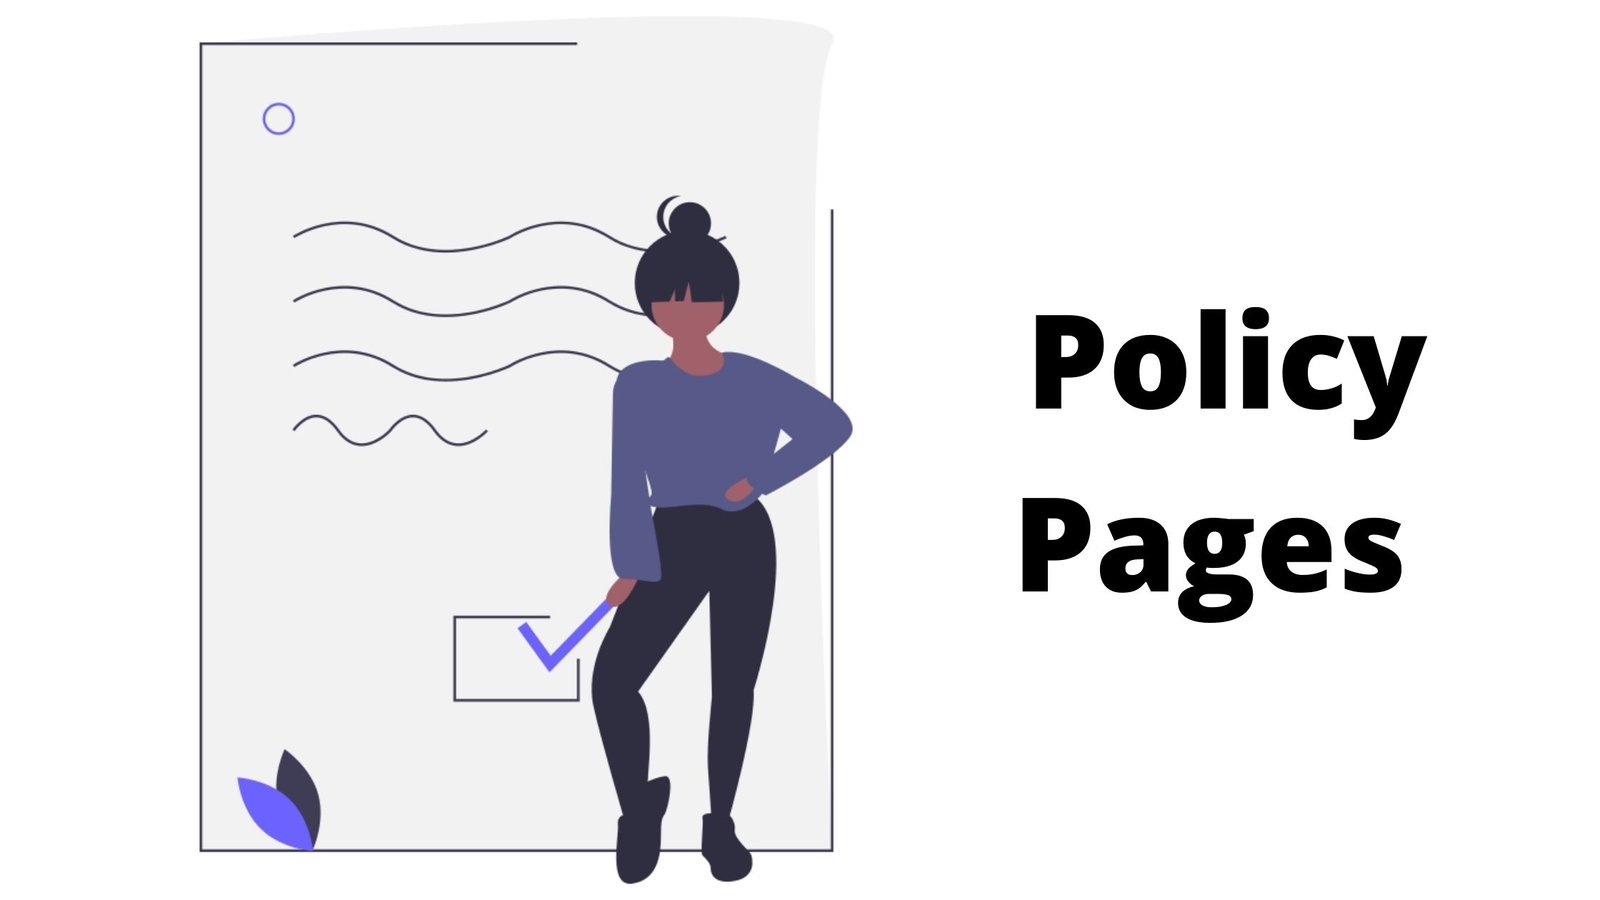 Policy pages